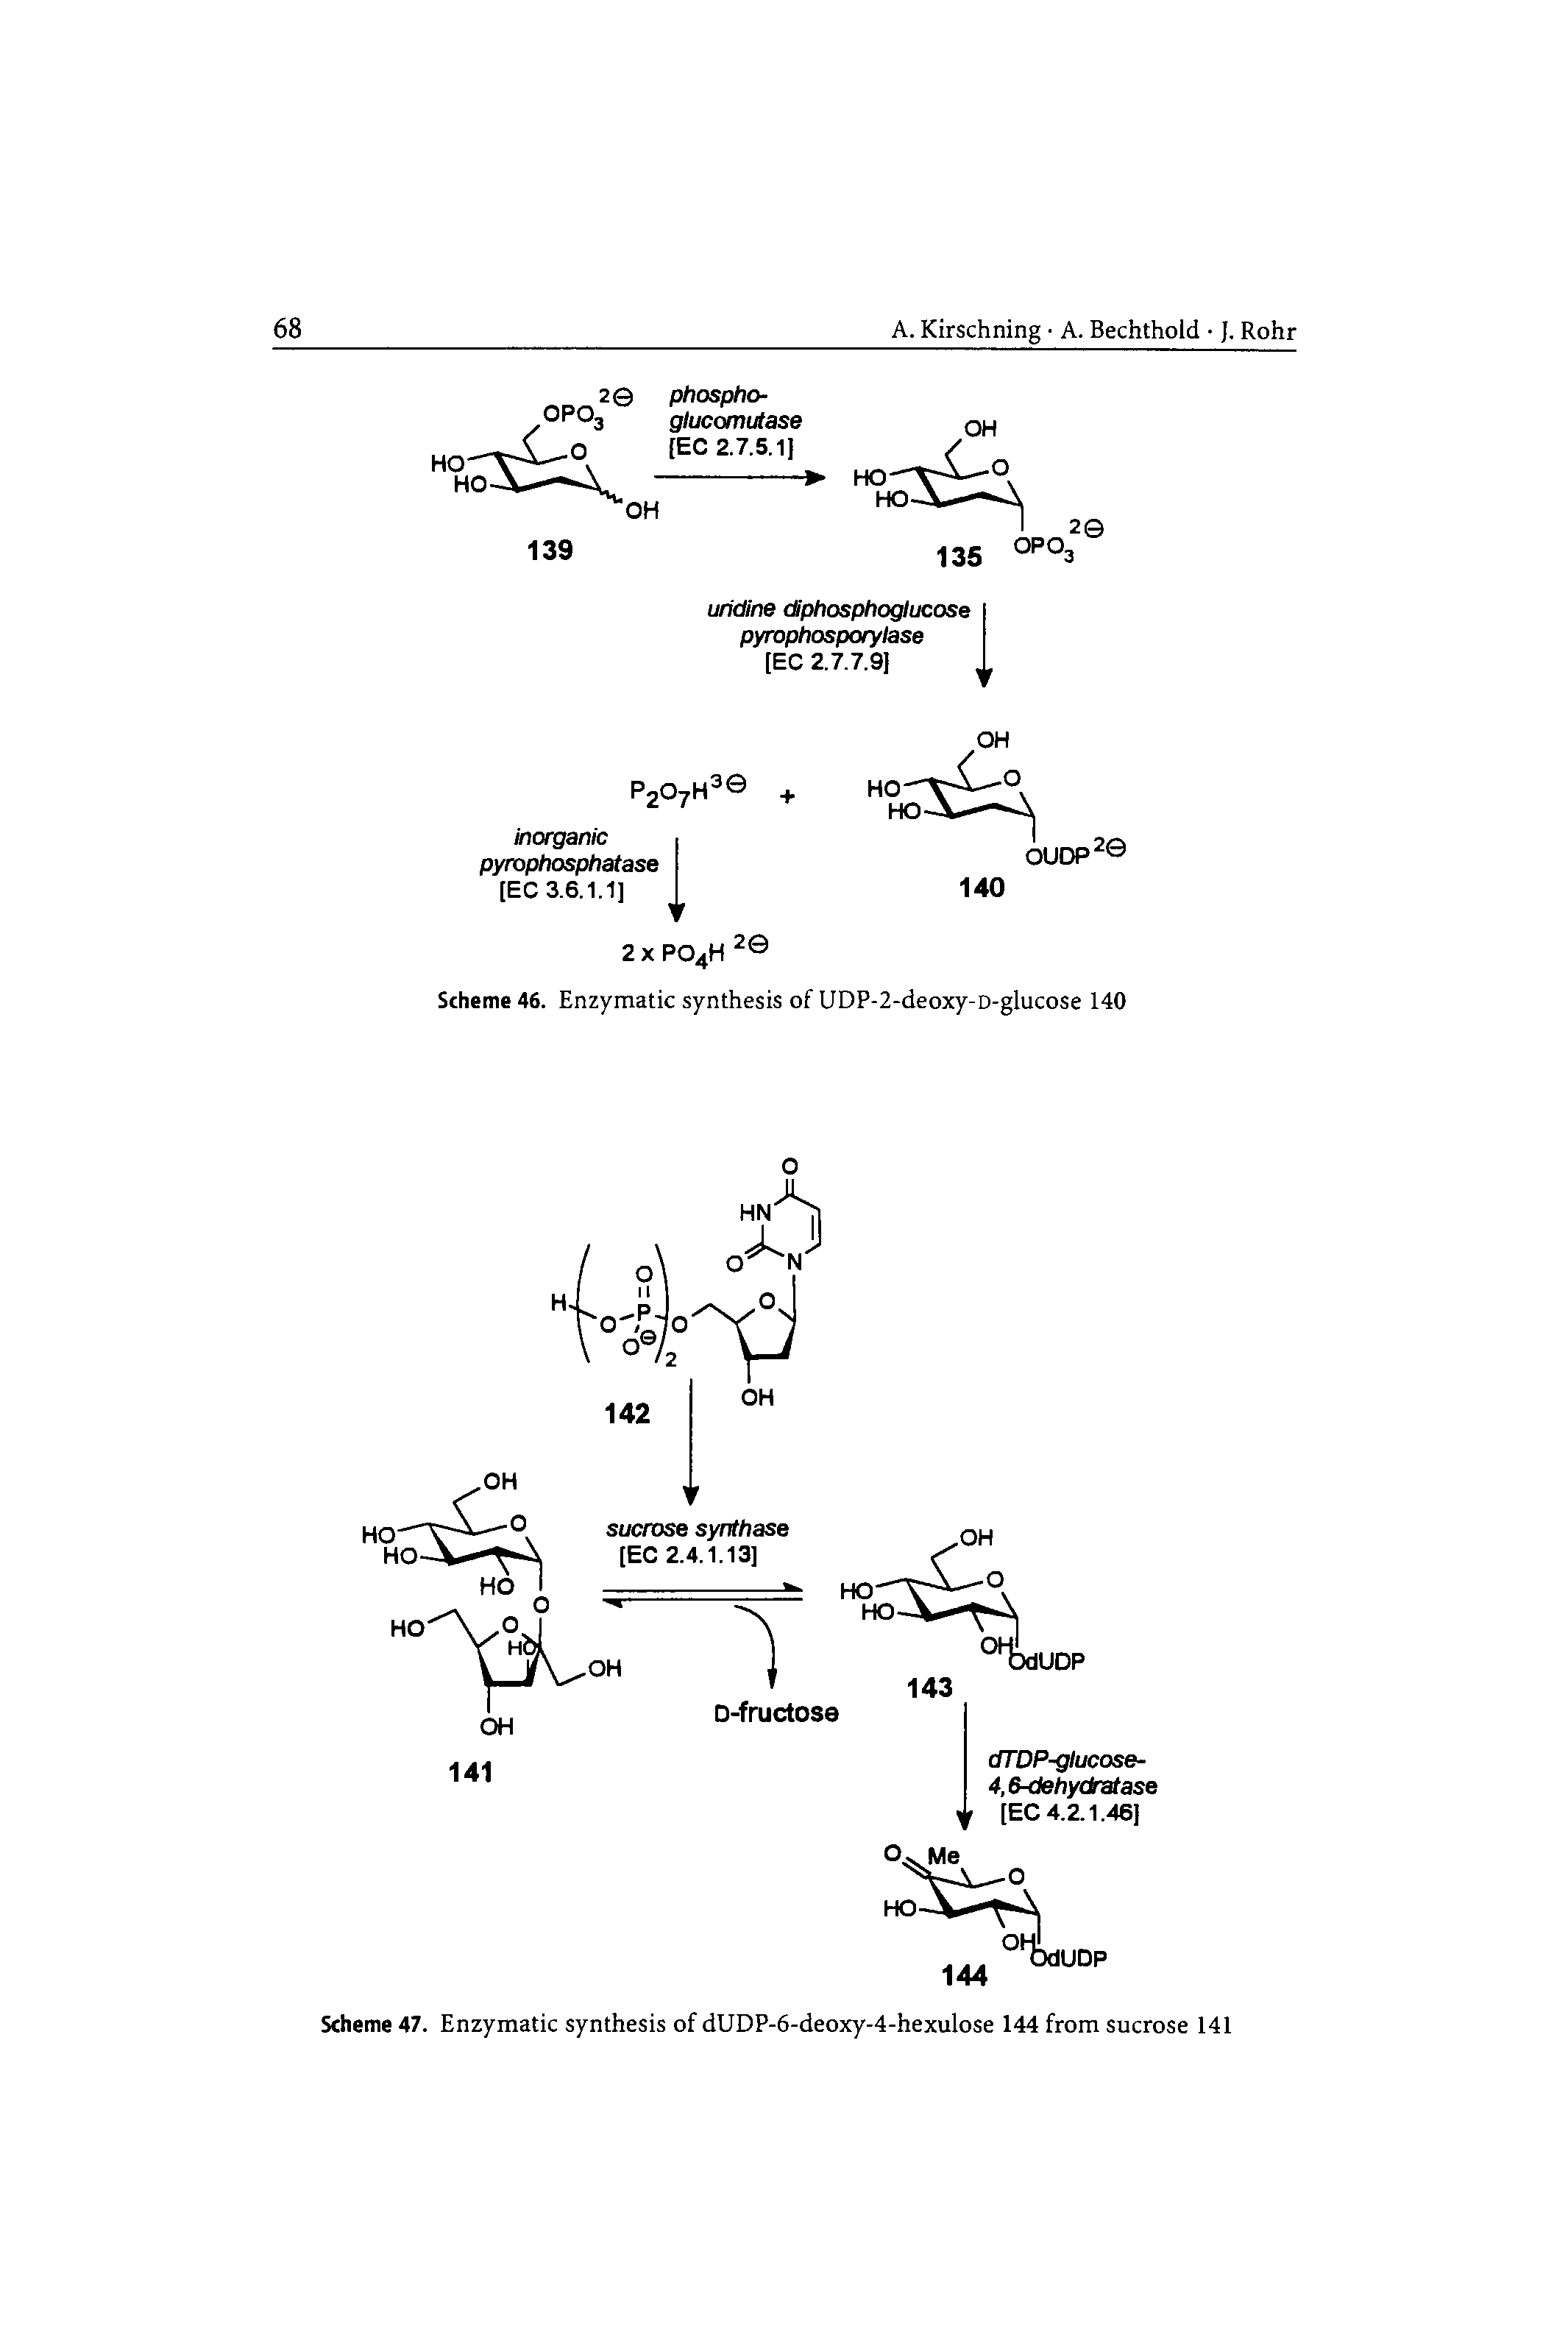 Scheme 47. Enzymatic synthesis of dUDP-6-deoxy-4-hexulose 144 from sucrose 141...